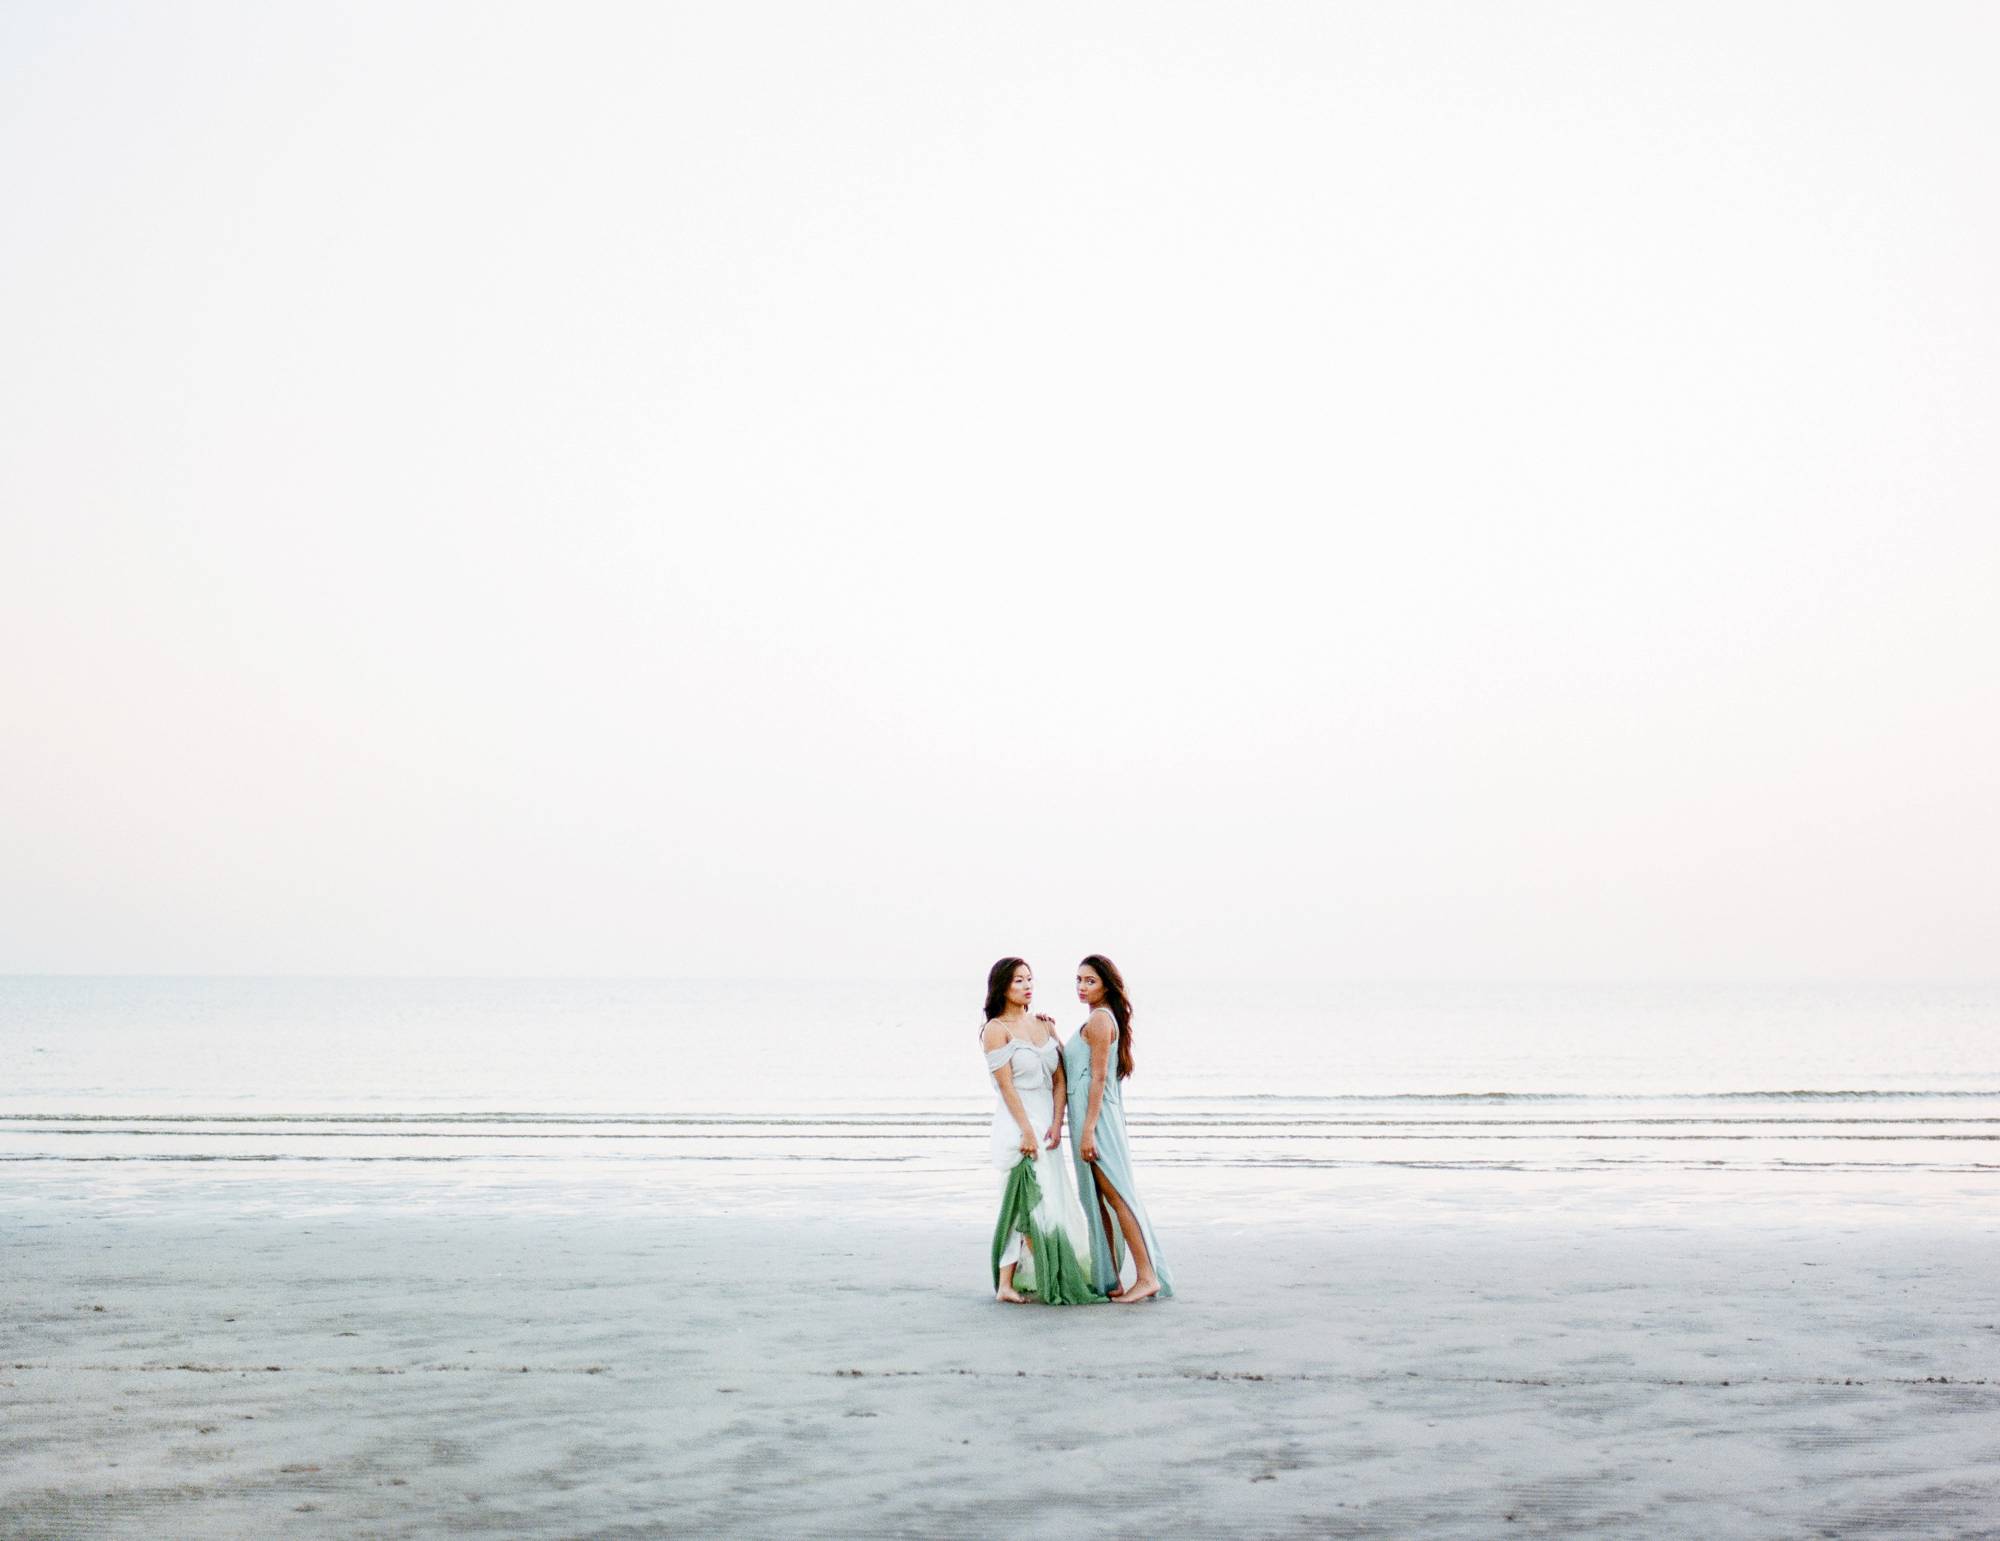 Fine art film photography for beach weddings in the Netherlands - Bright and airy bridal portrait on the coast of Holland